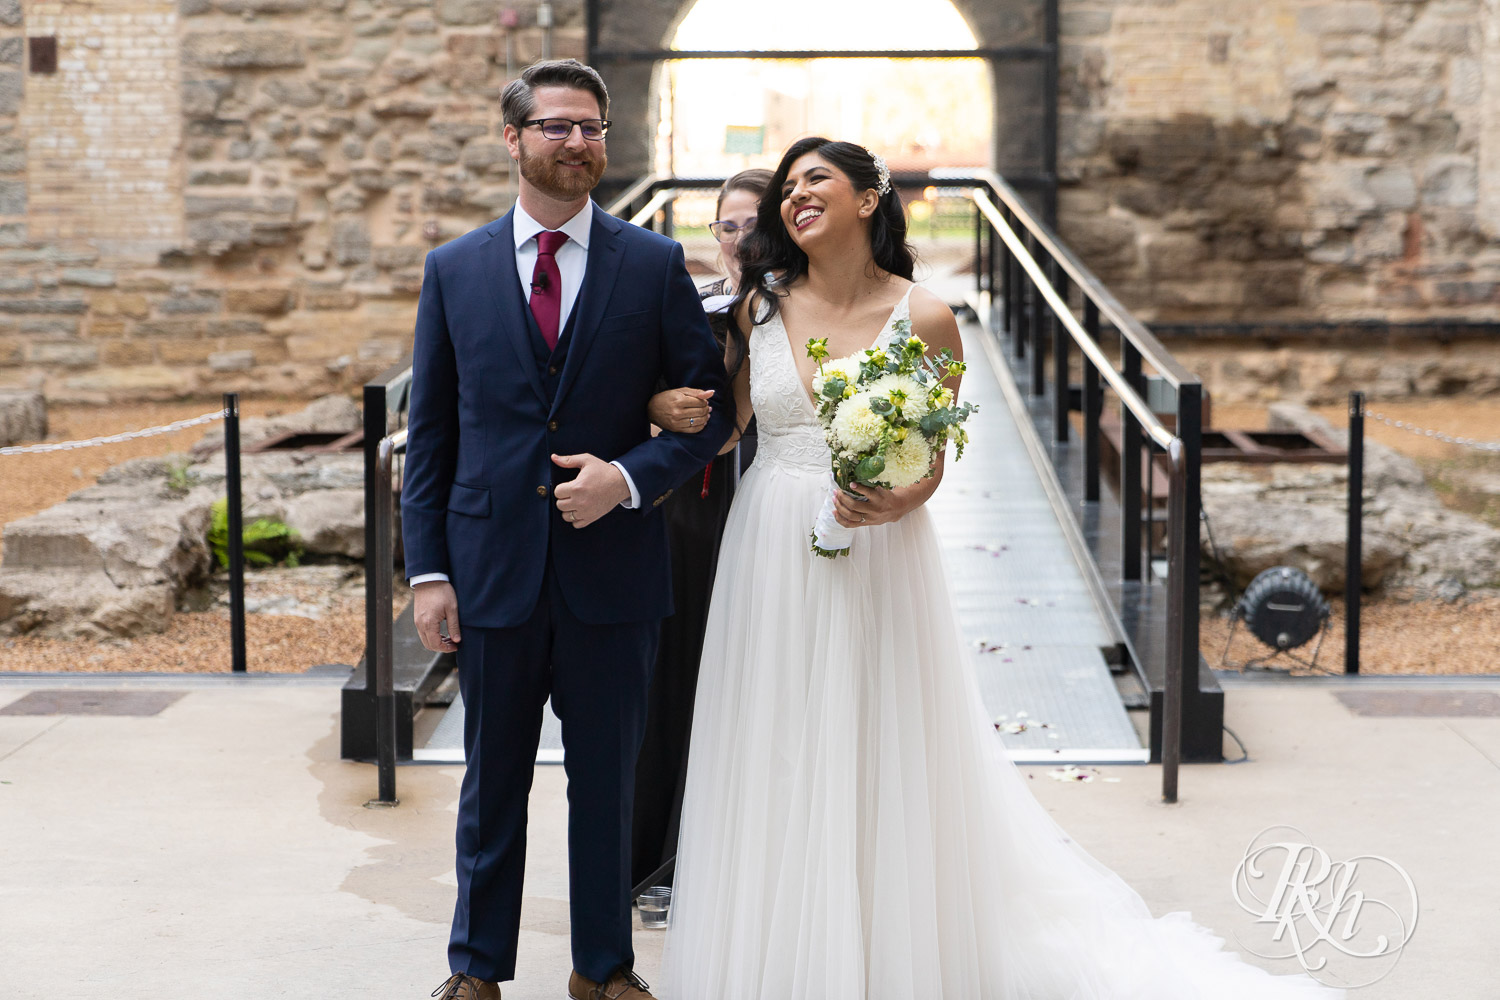 Bride and groom walking down alter after wedding ceremony at Mill City Museum in Minneapolis, Minnesota